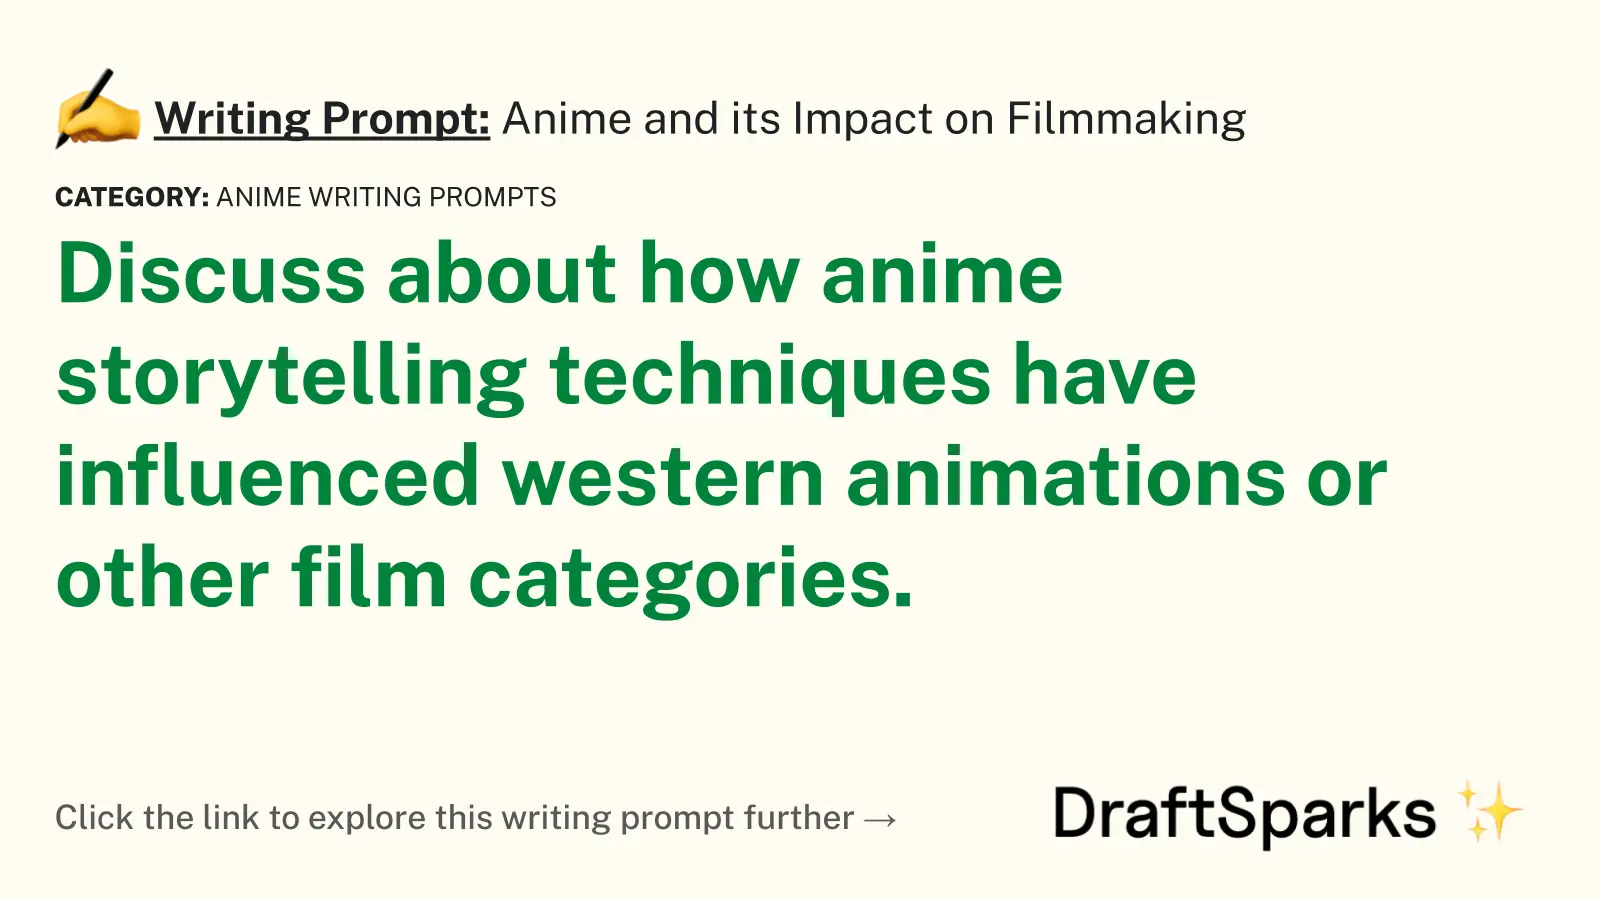 Anime and its Impact on Filmmaking